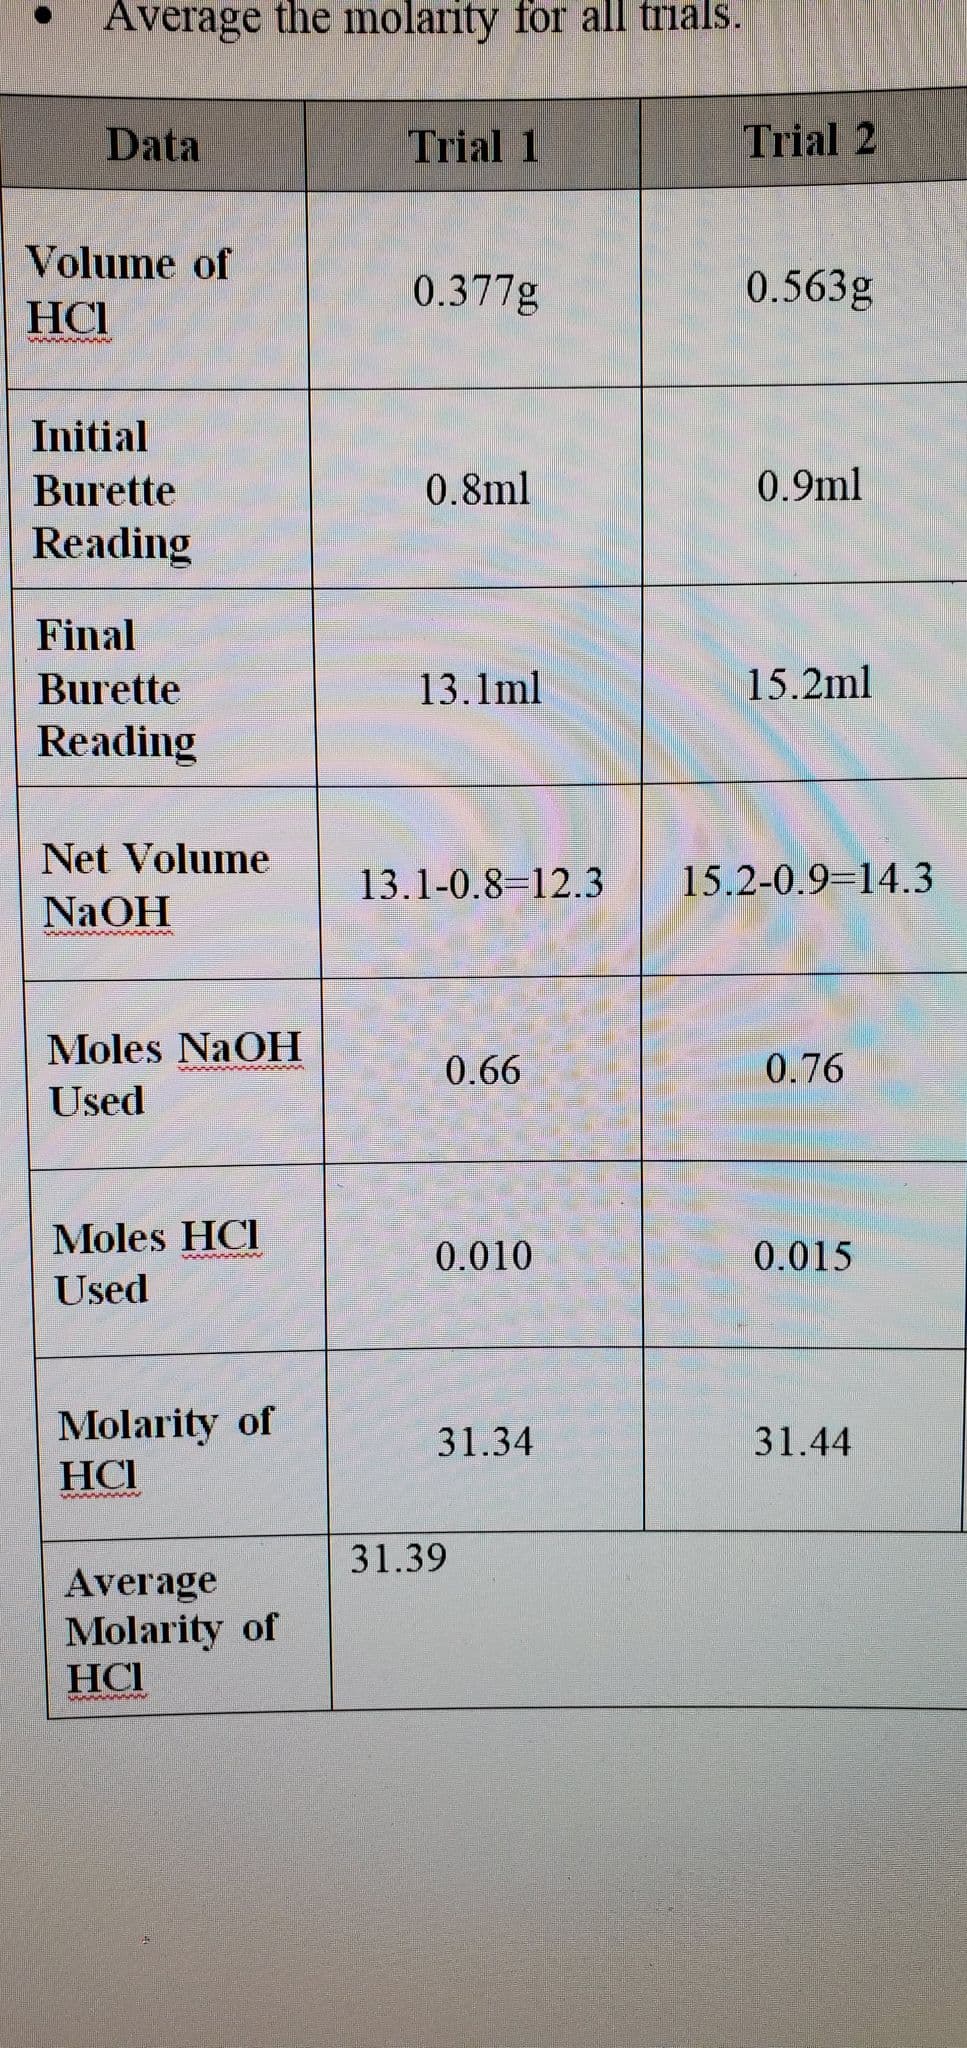 Average the molarity for all trials.
Data
Volume of
HCI
MA
Initial
Burette
Reading
Final
Burette
Reading
Net Volume
NaOH
Moles NaOH
Used
Moles HCI
Used
www.
Molarity of
HCI
www
Average
Molarity of
HCI
www.
Trial 1
0.377g
0.8ml
13.1ml
13.1-0.8-12.3
0.66
0.010
31.34
31.39
Trial 2
0.563g
0.9ml
15.2ml
15.2-0.9 14.3
0.76
0.015
31.44